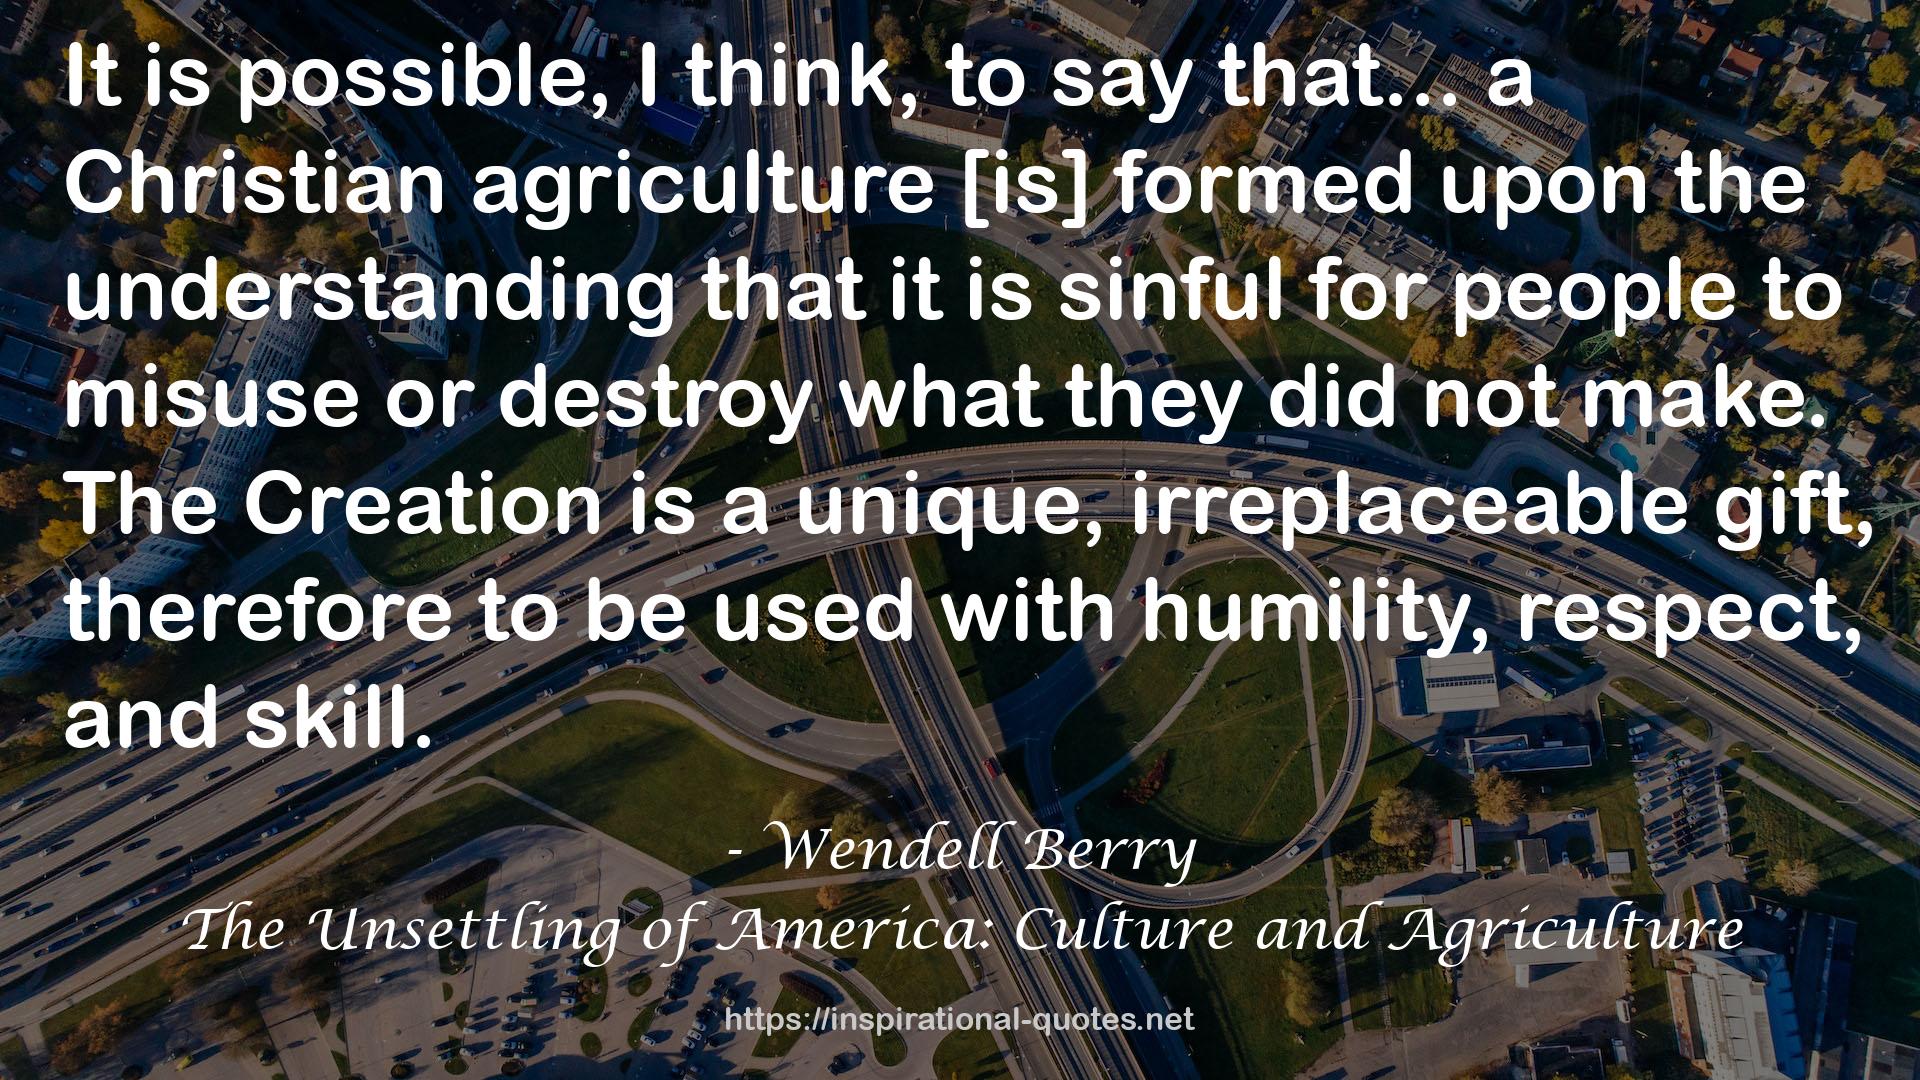 The Unsettling of America: Culture and Agriculture QUOTES